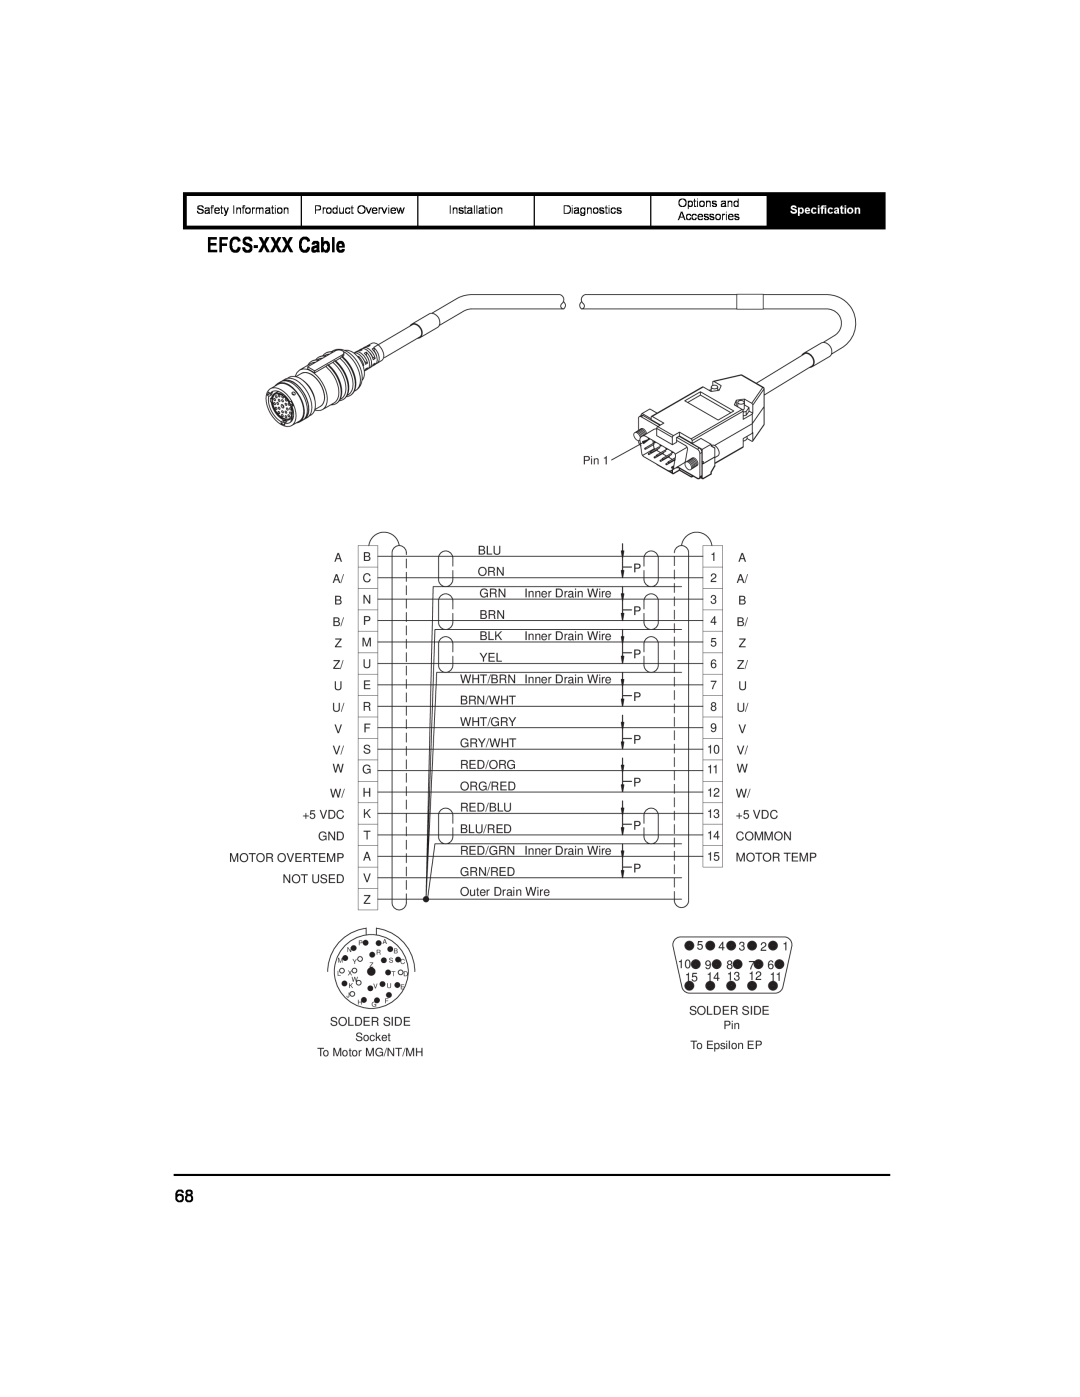 Emerson 400518-01 installation manual EFCS-XXX Cable, Specification 